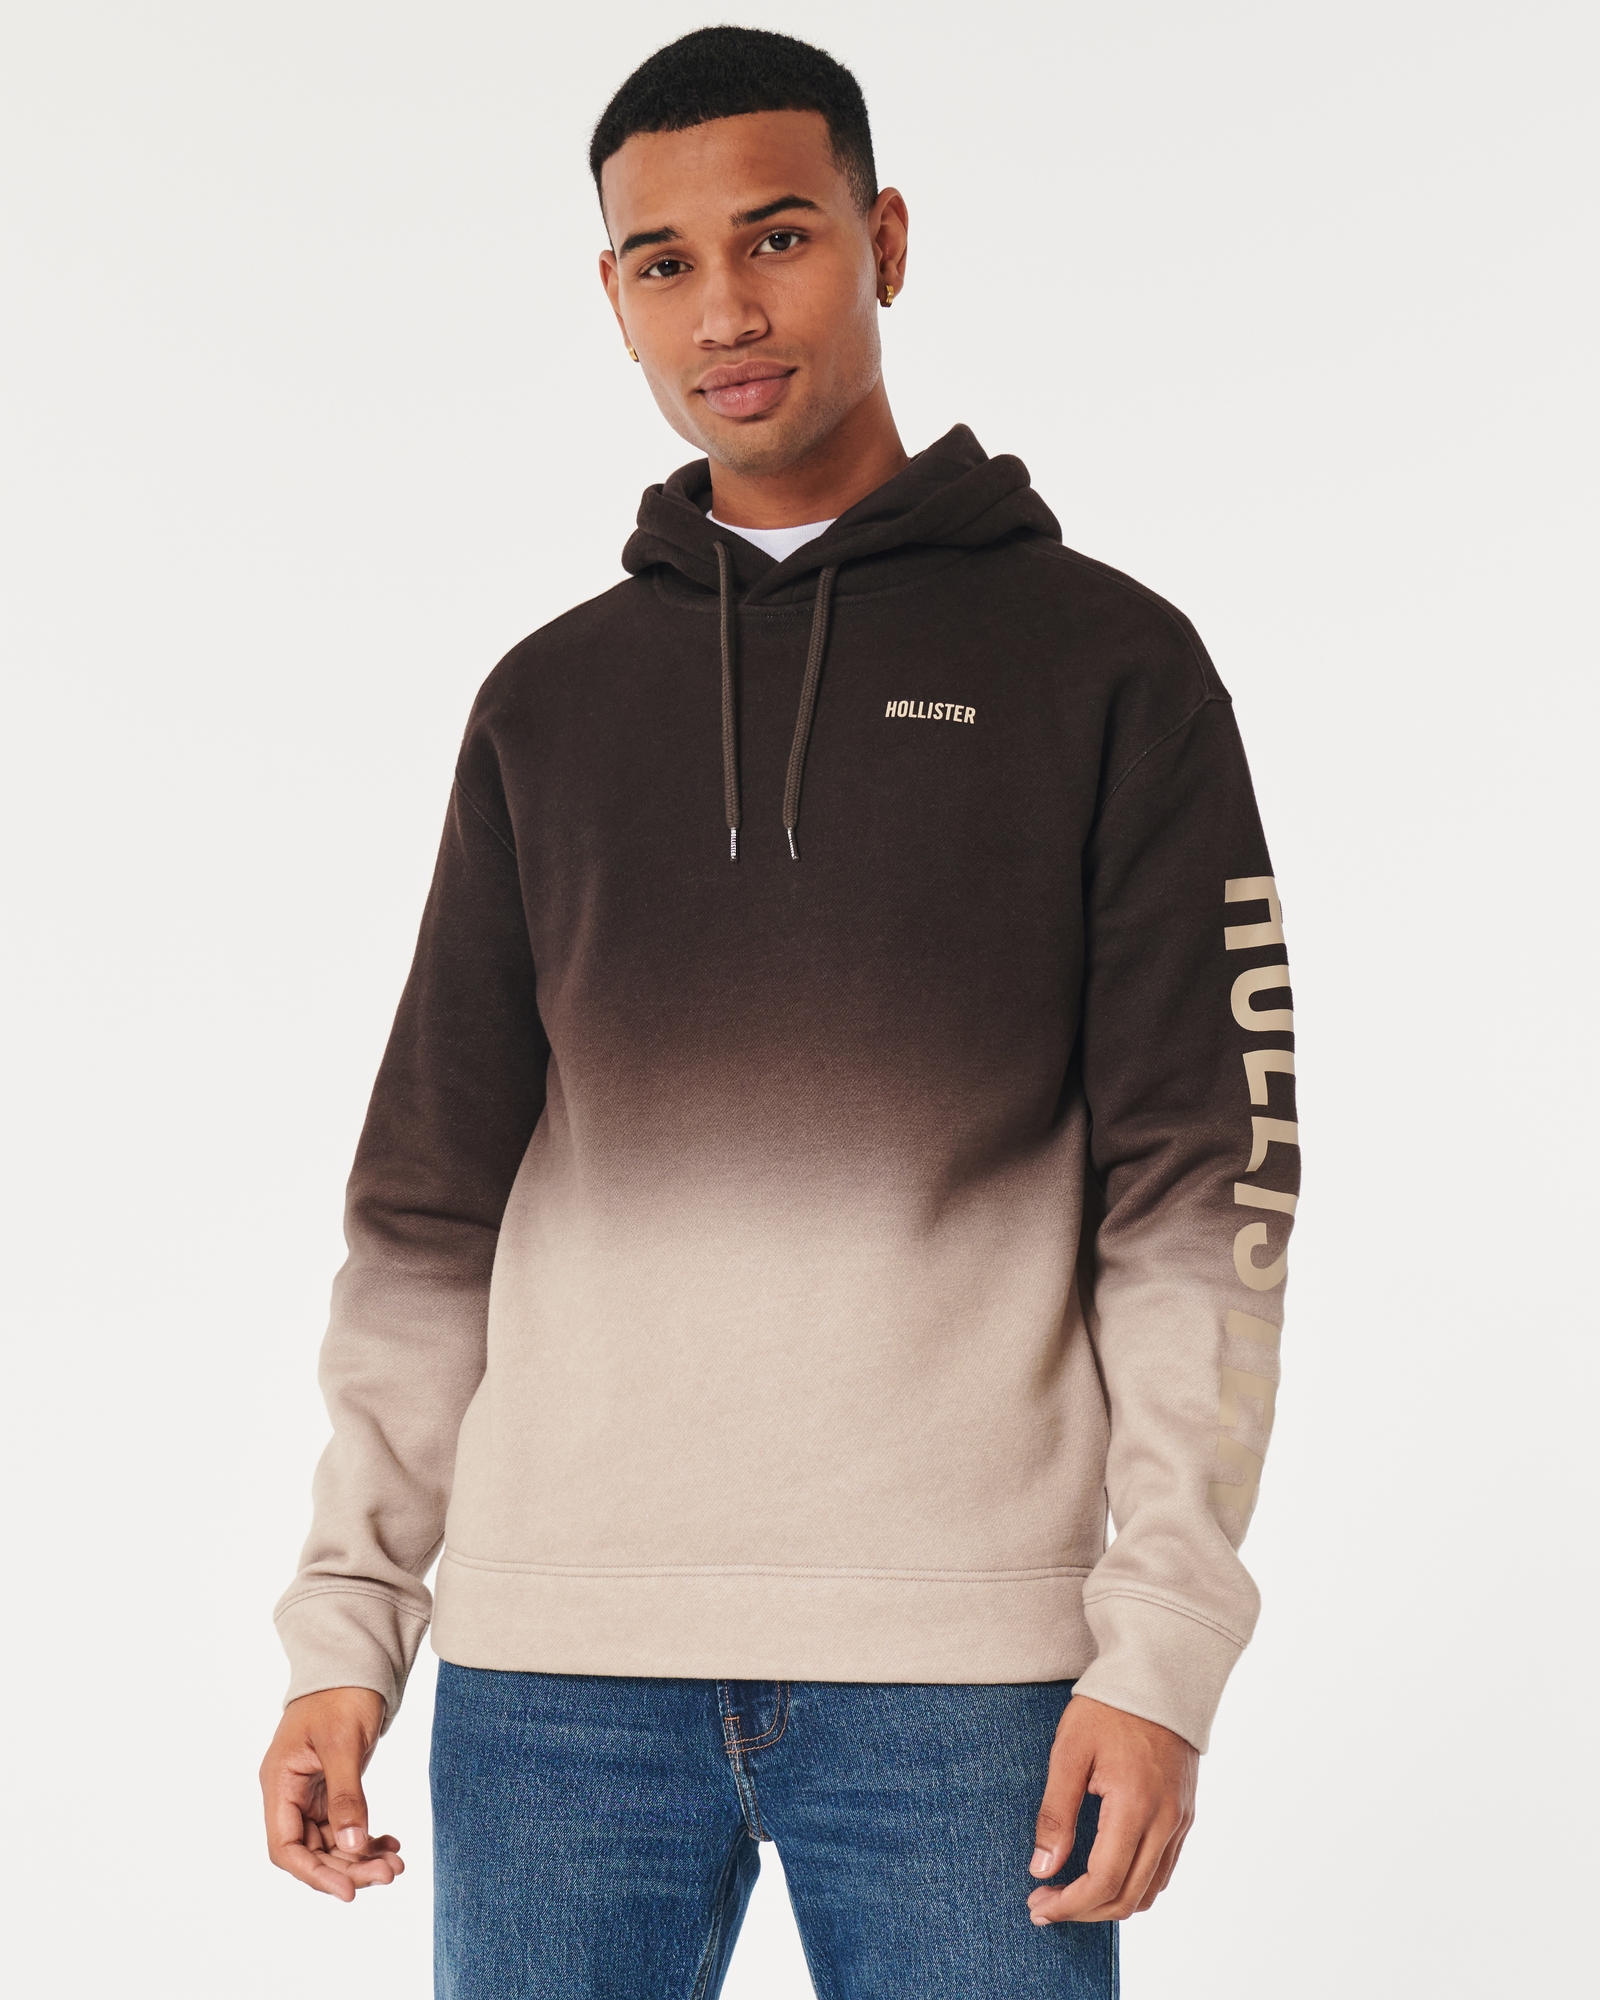 Hollister hoodie in grey with chest logo - ShopStyle